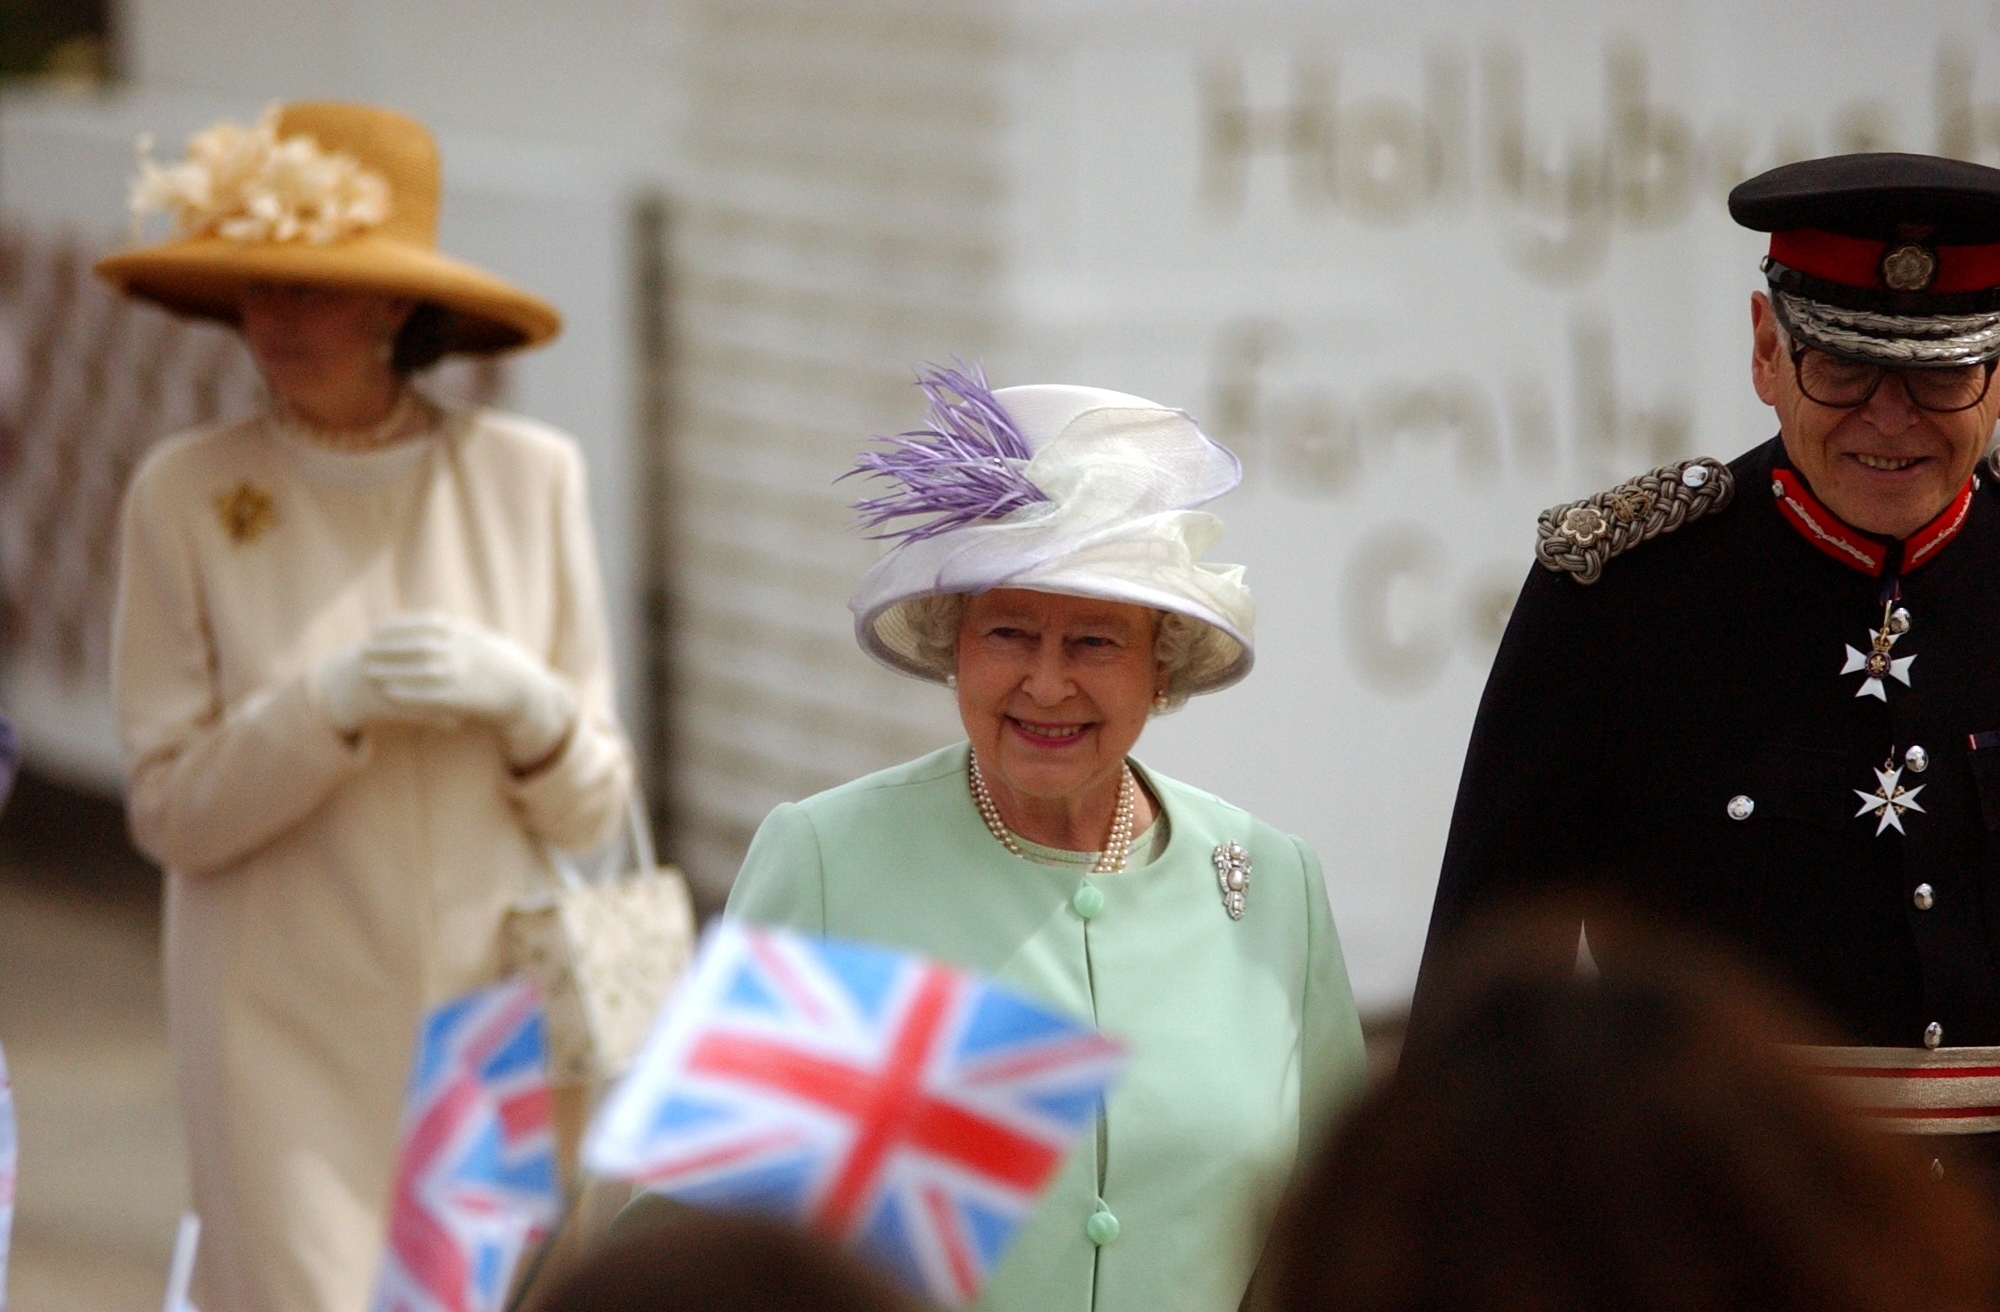 The Queen on a visit to Hollybush Family Centre in the St Martin’s area of Hereford in 2003